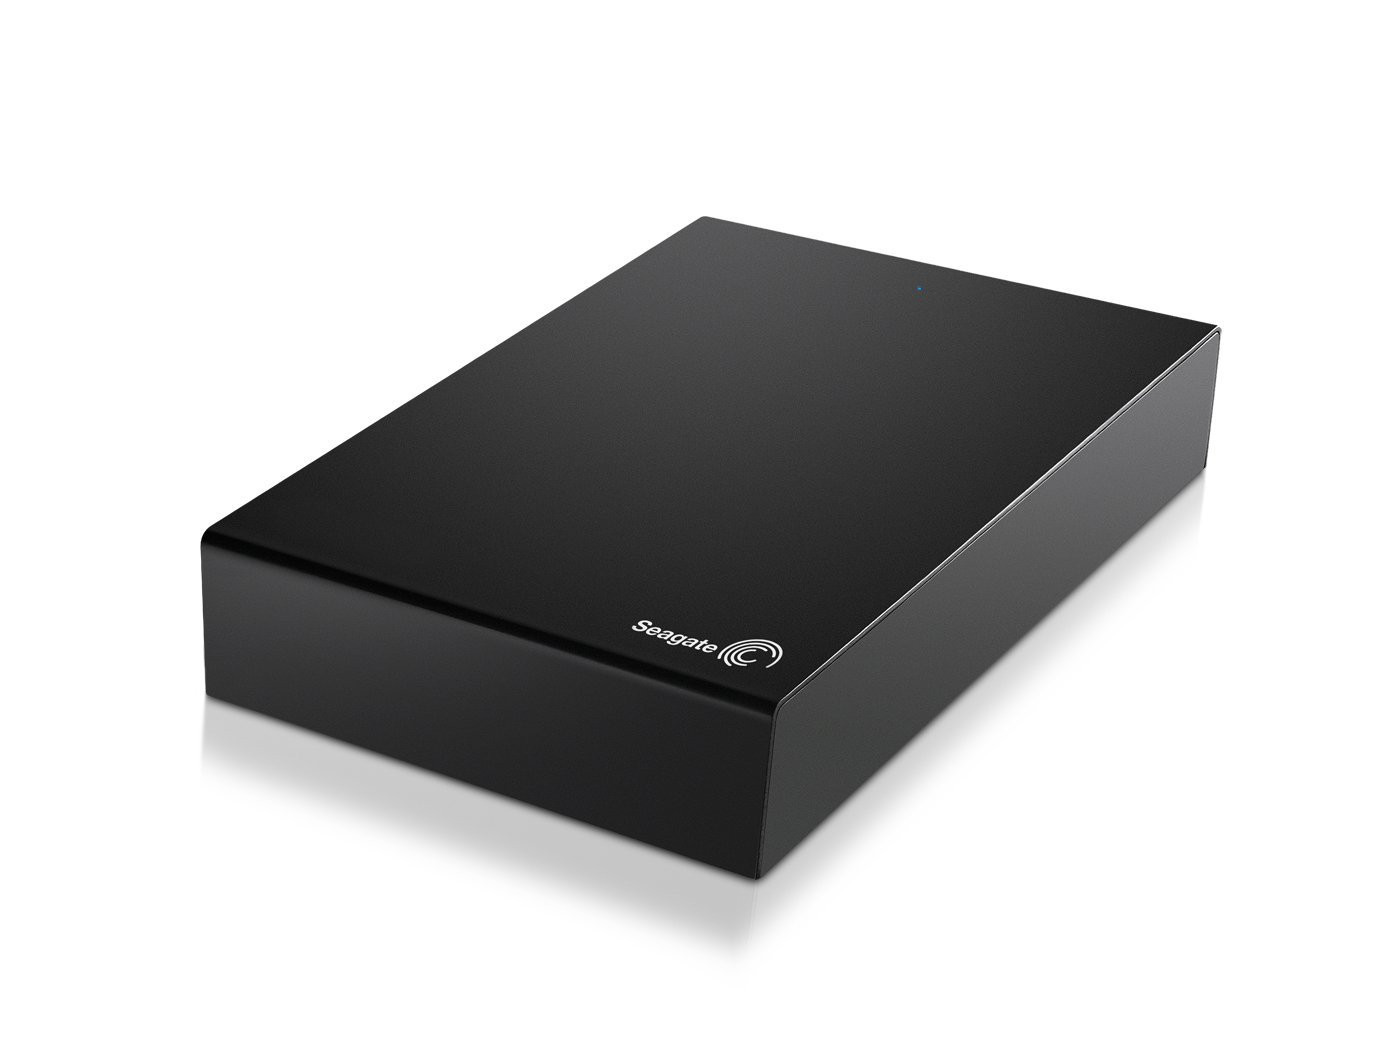 seagate external hard drive compatible with mac and pc